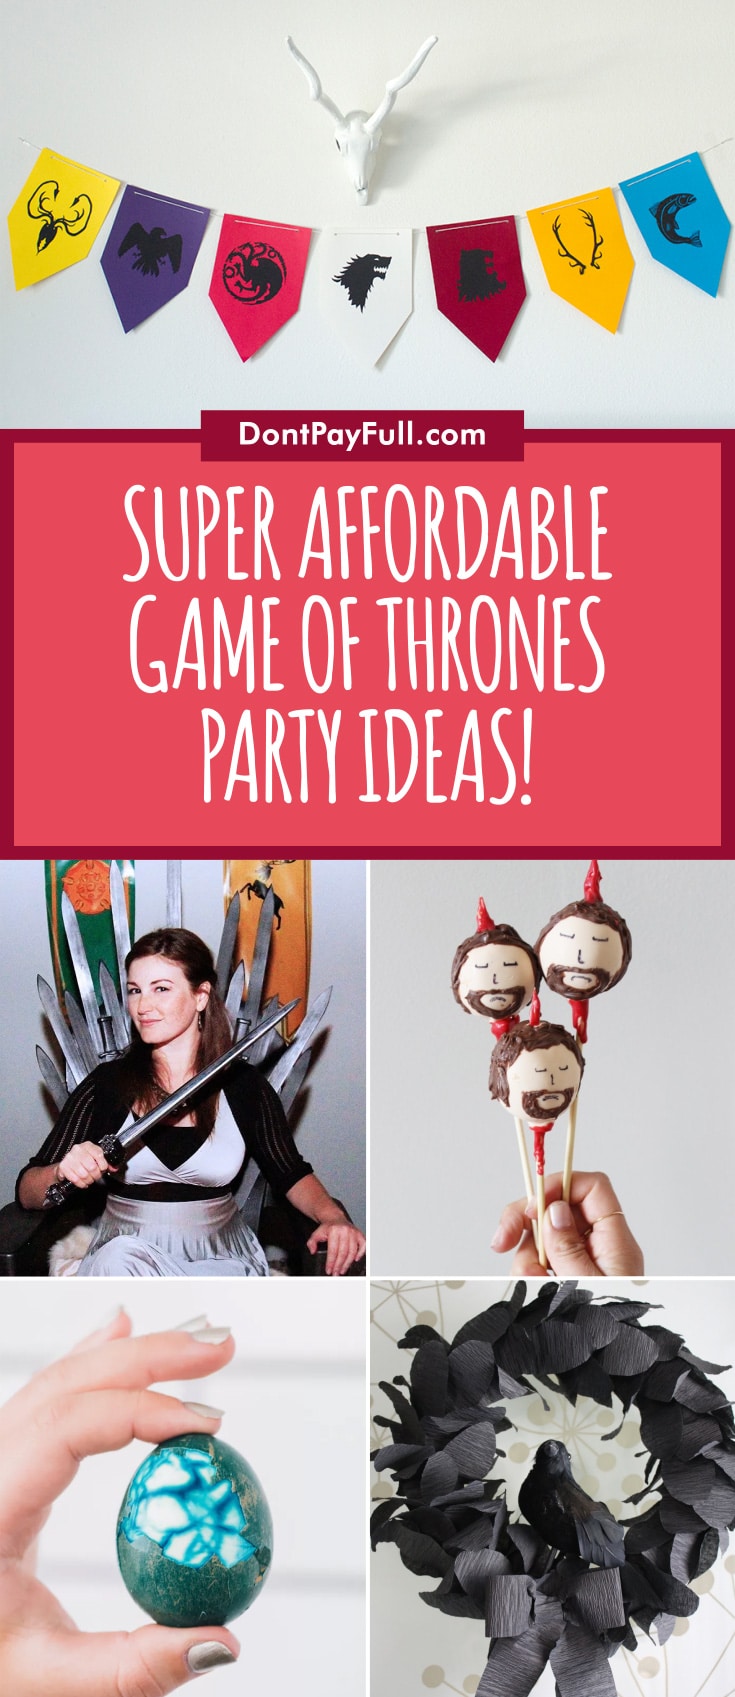 Super Affordable Game of Thrones Party Ideas You Can Try This Halloween!